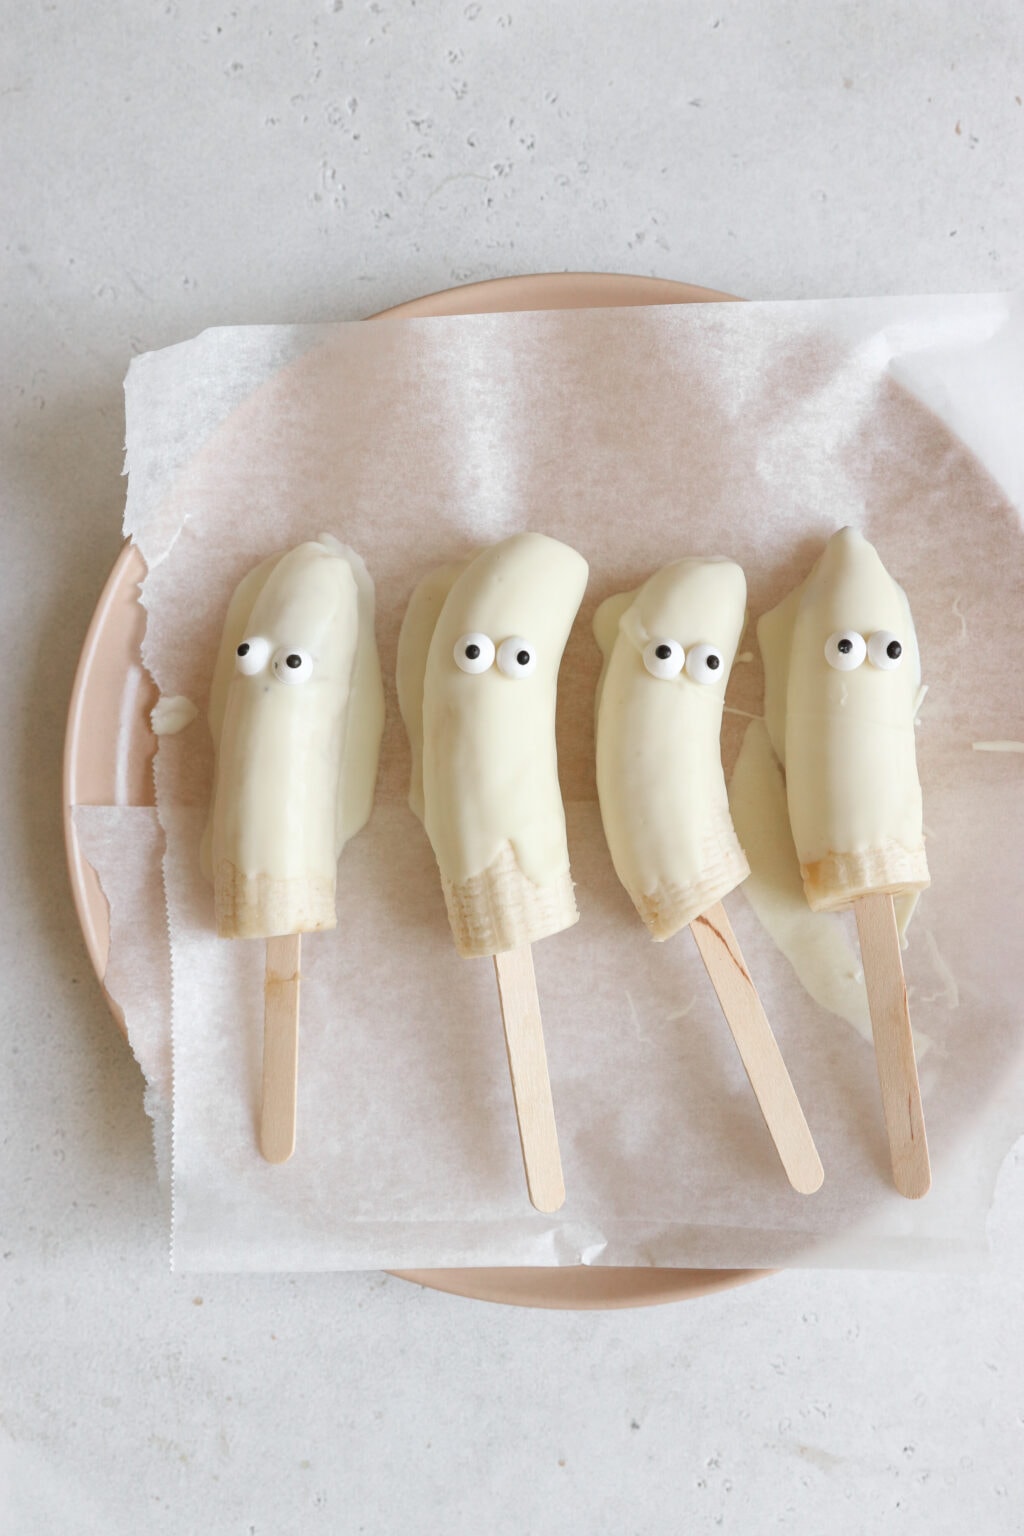 4 bananas are on a pink plate. The bananas are covered in white chocolate and have candy eyes and are on popsicle sticks. The bananas look like ghosts.